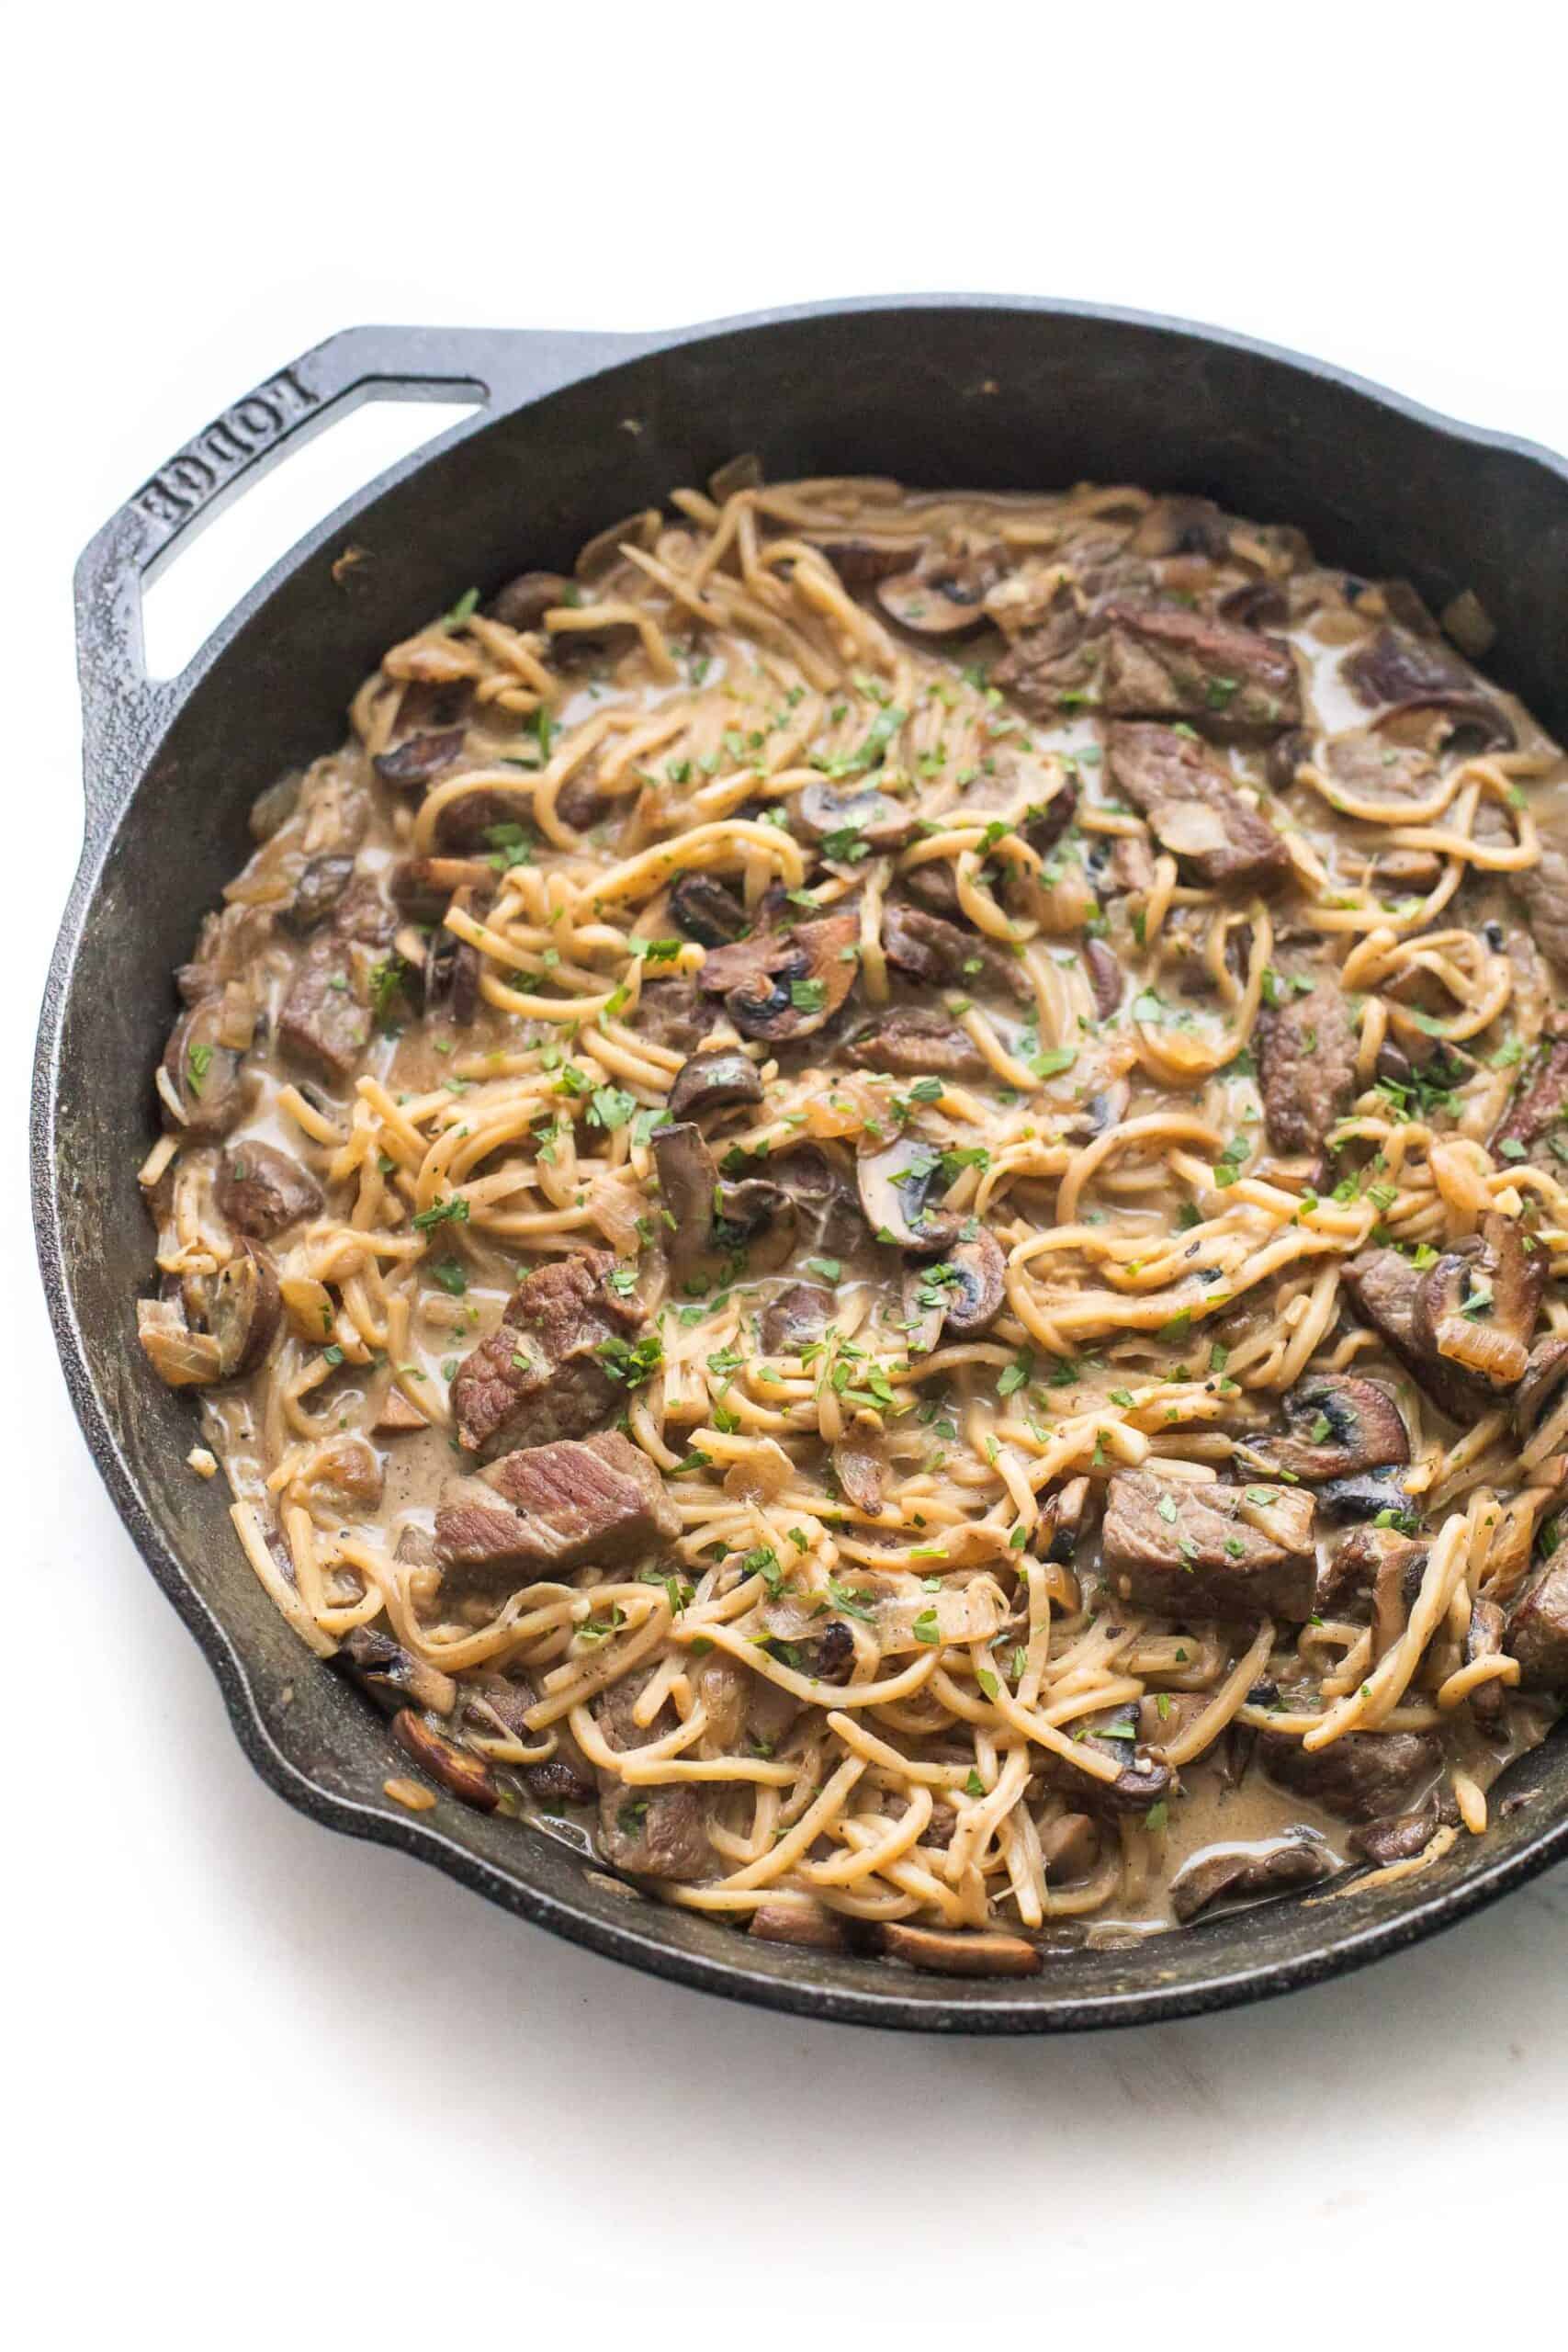 keto beef stroganoff in a cast iron skillet on a white background